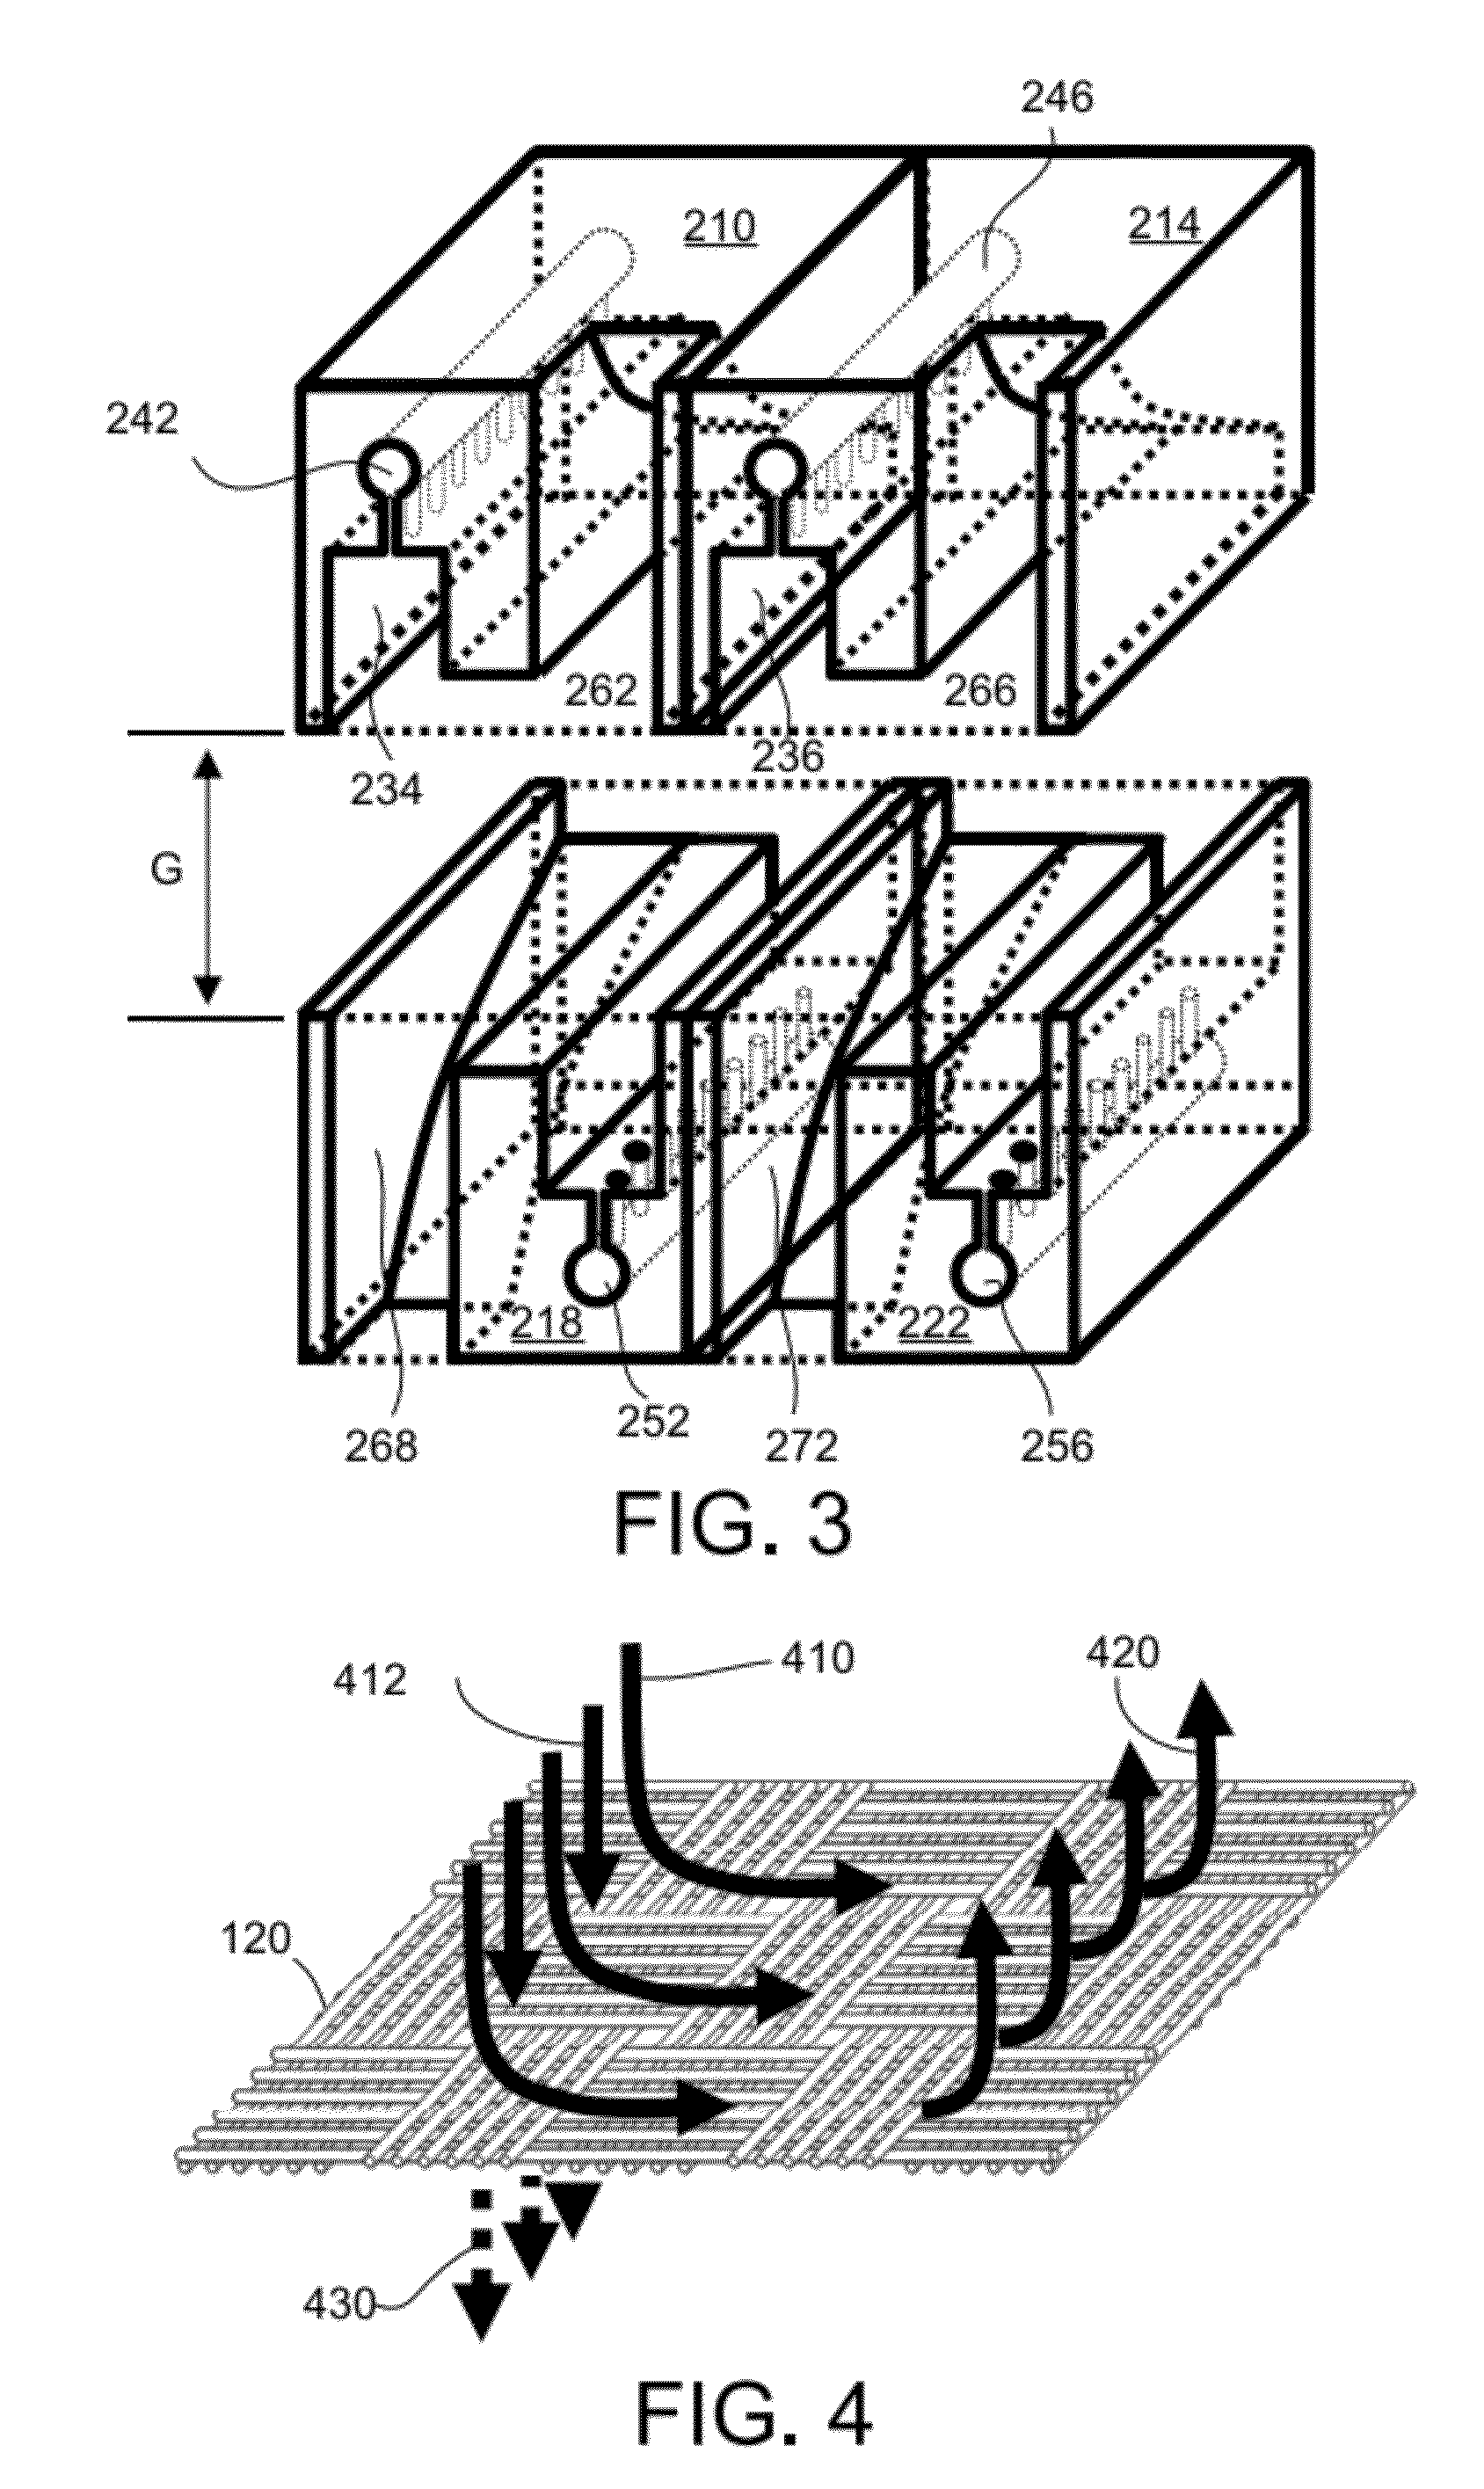 Depositing thin layer of material on permeable substrate